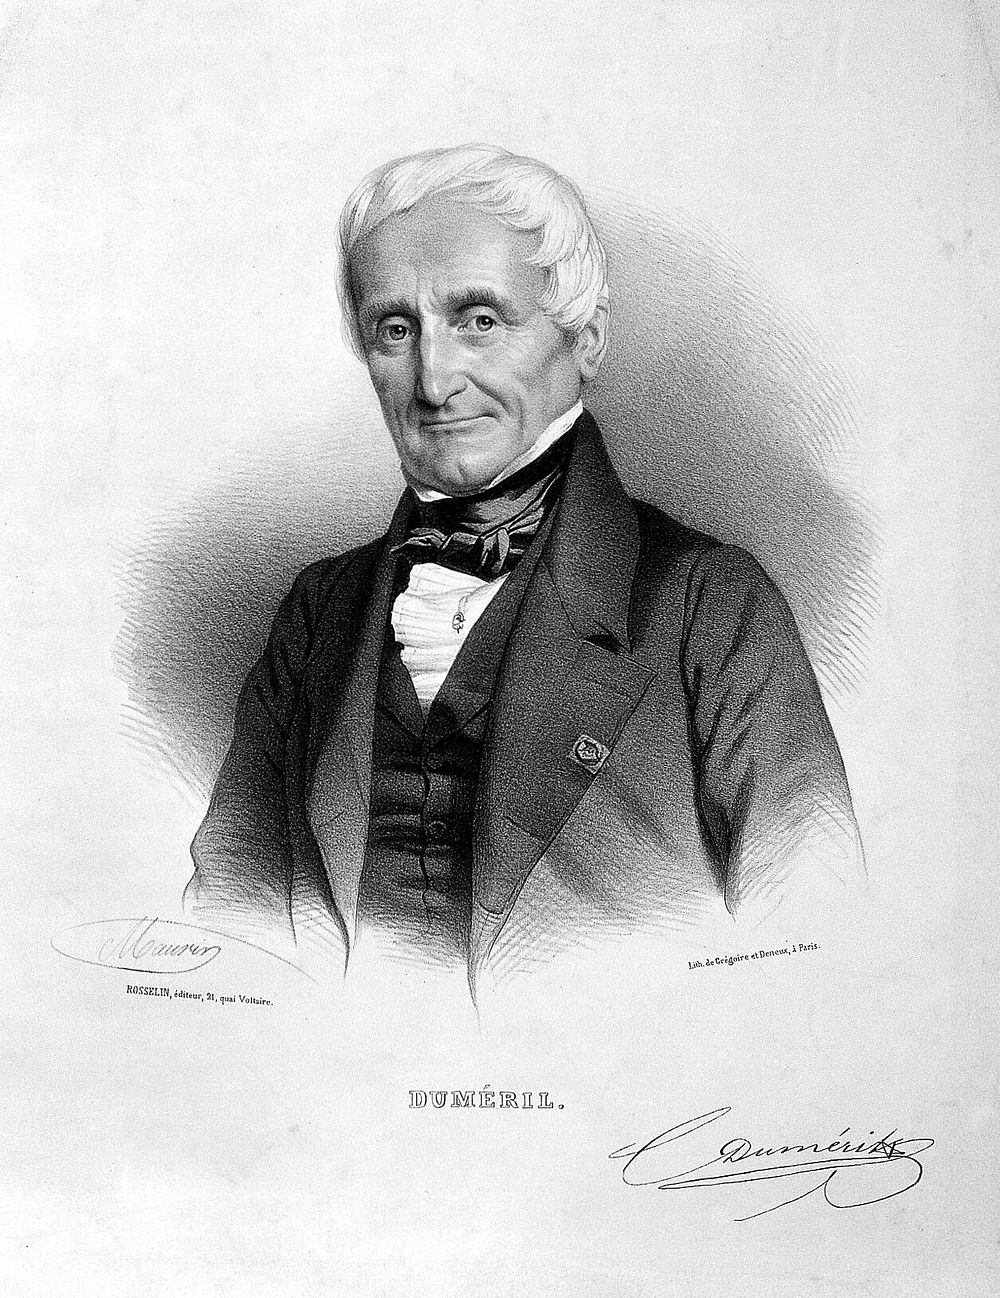 André-Marie-Constant Duméril. Lithograph by N.-E. Maurin.